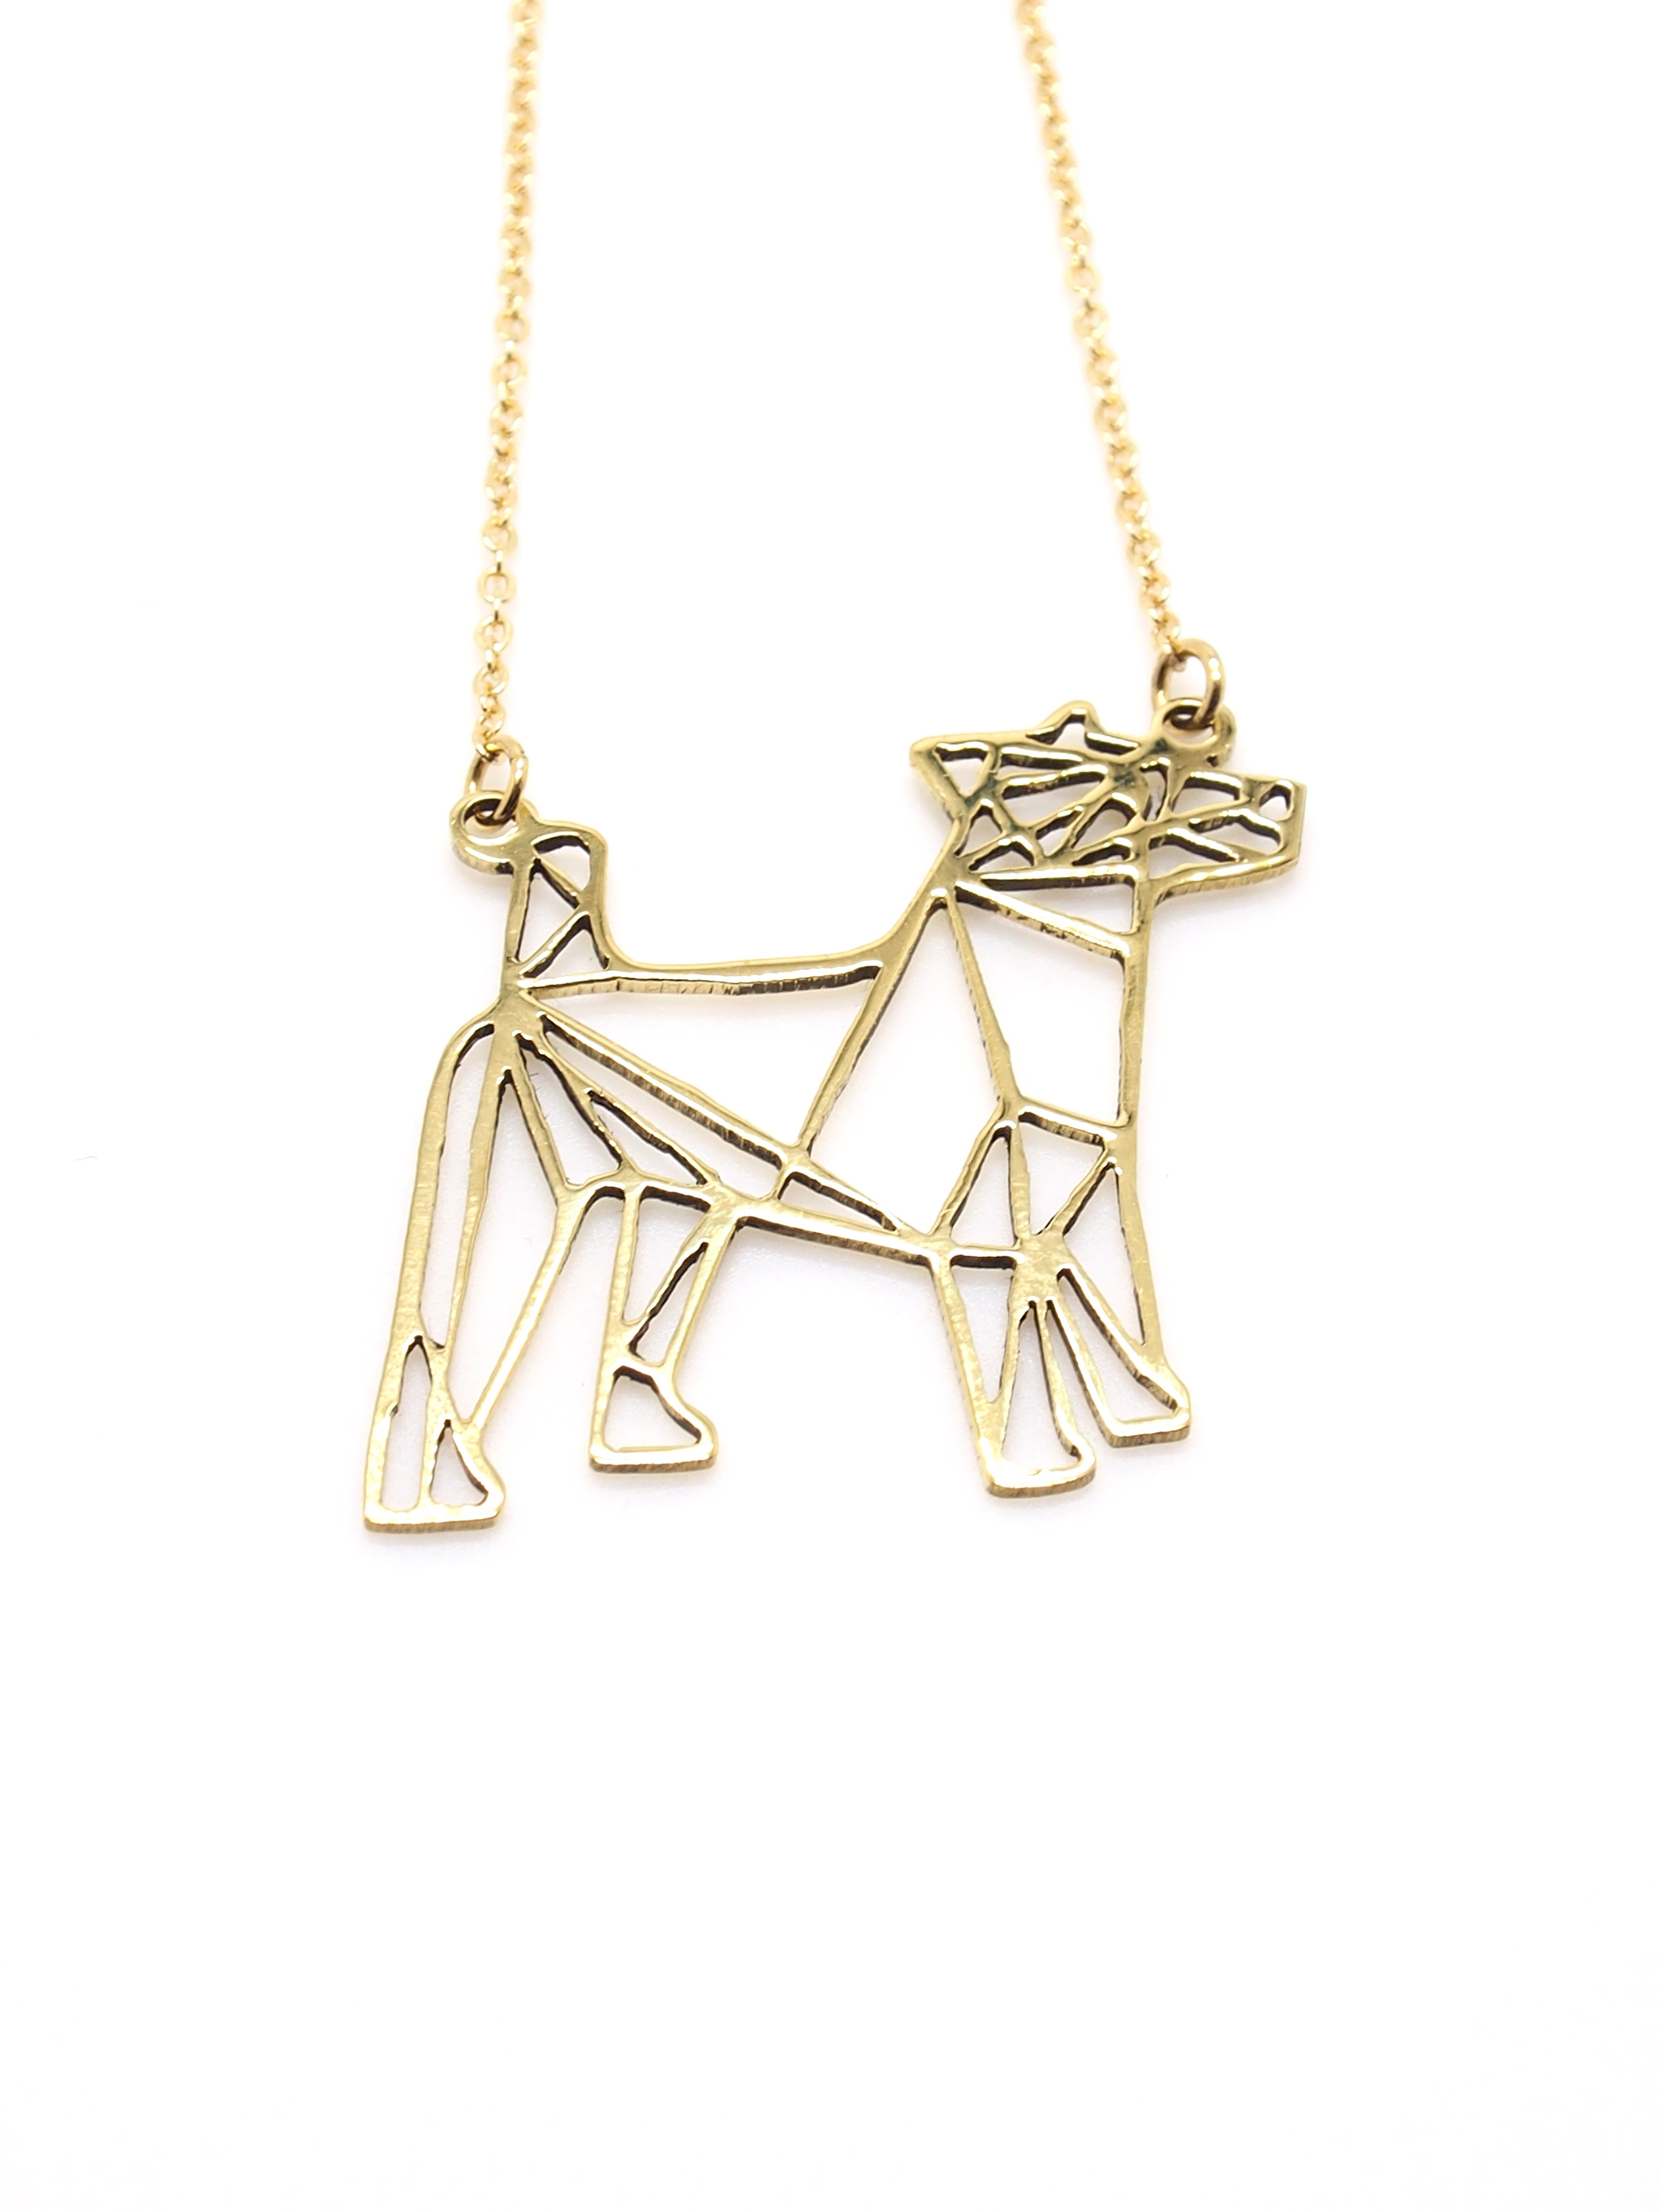 Hansel & Smith - Jack Russell Terrier Necklace